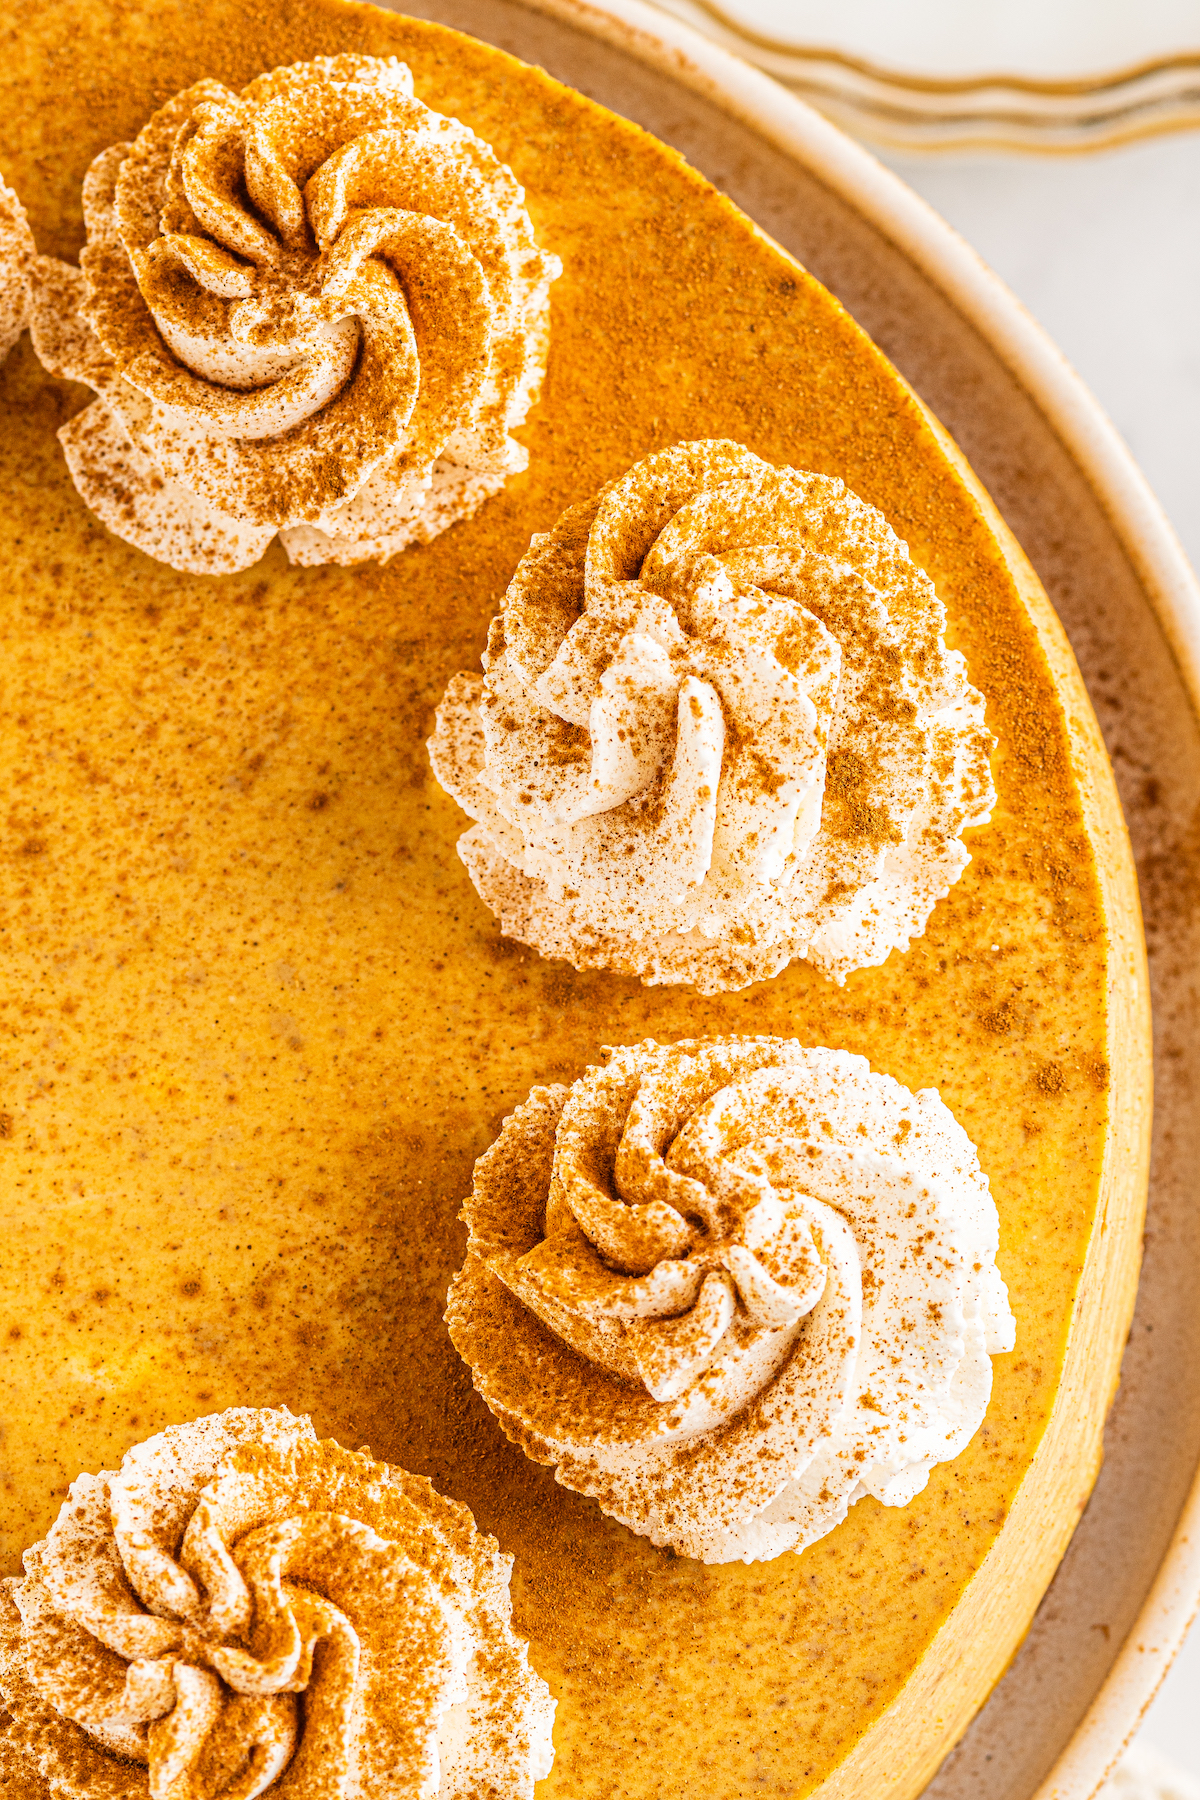 Close-up, overhead shot of pumpkin cheesecake garnished with whipped cream.